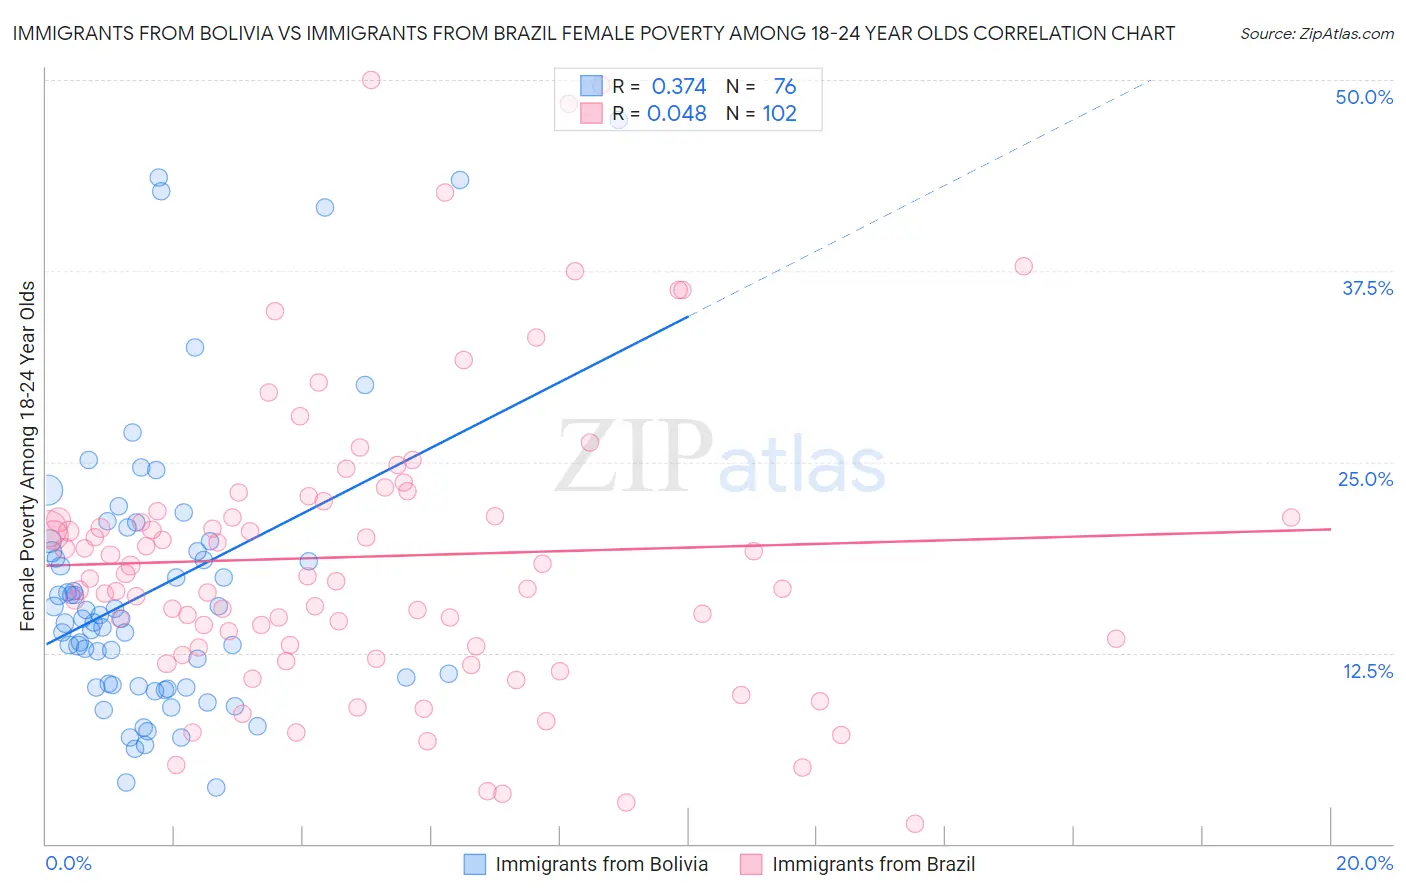 Immigrants from Bolivia vs Immigrants from Brazil Female Poverty Among 18-24 Year Olds